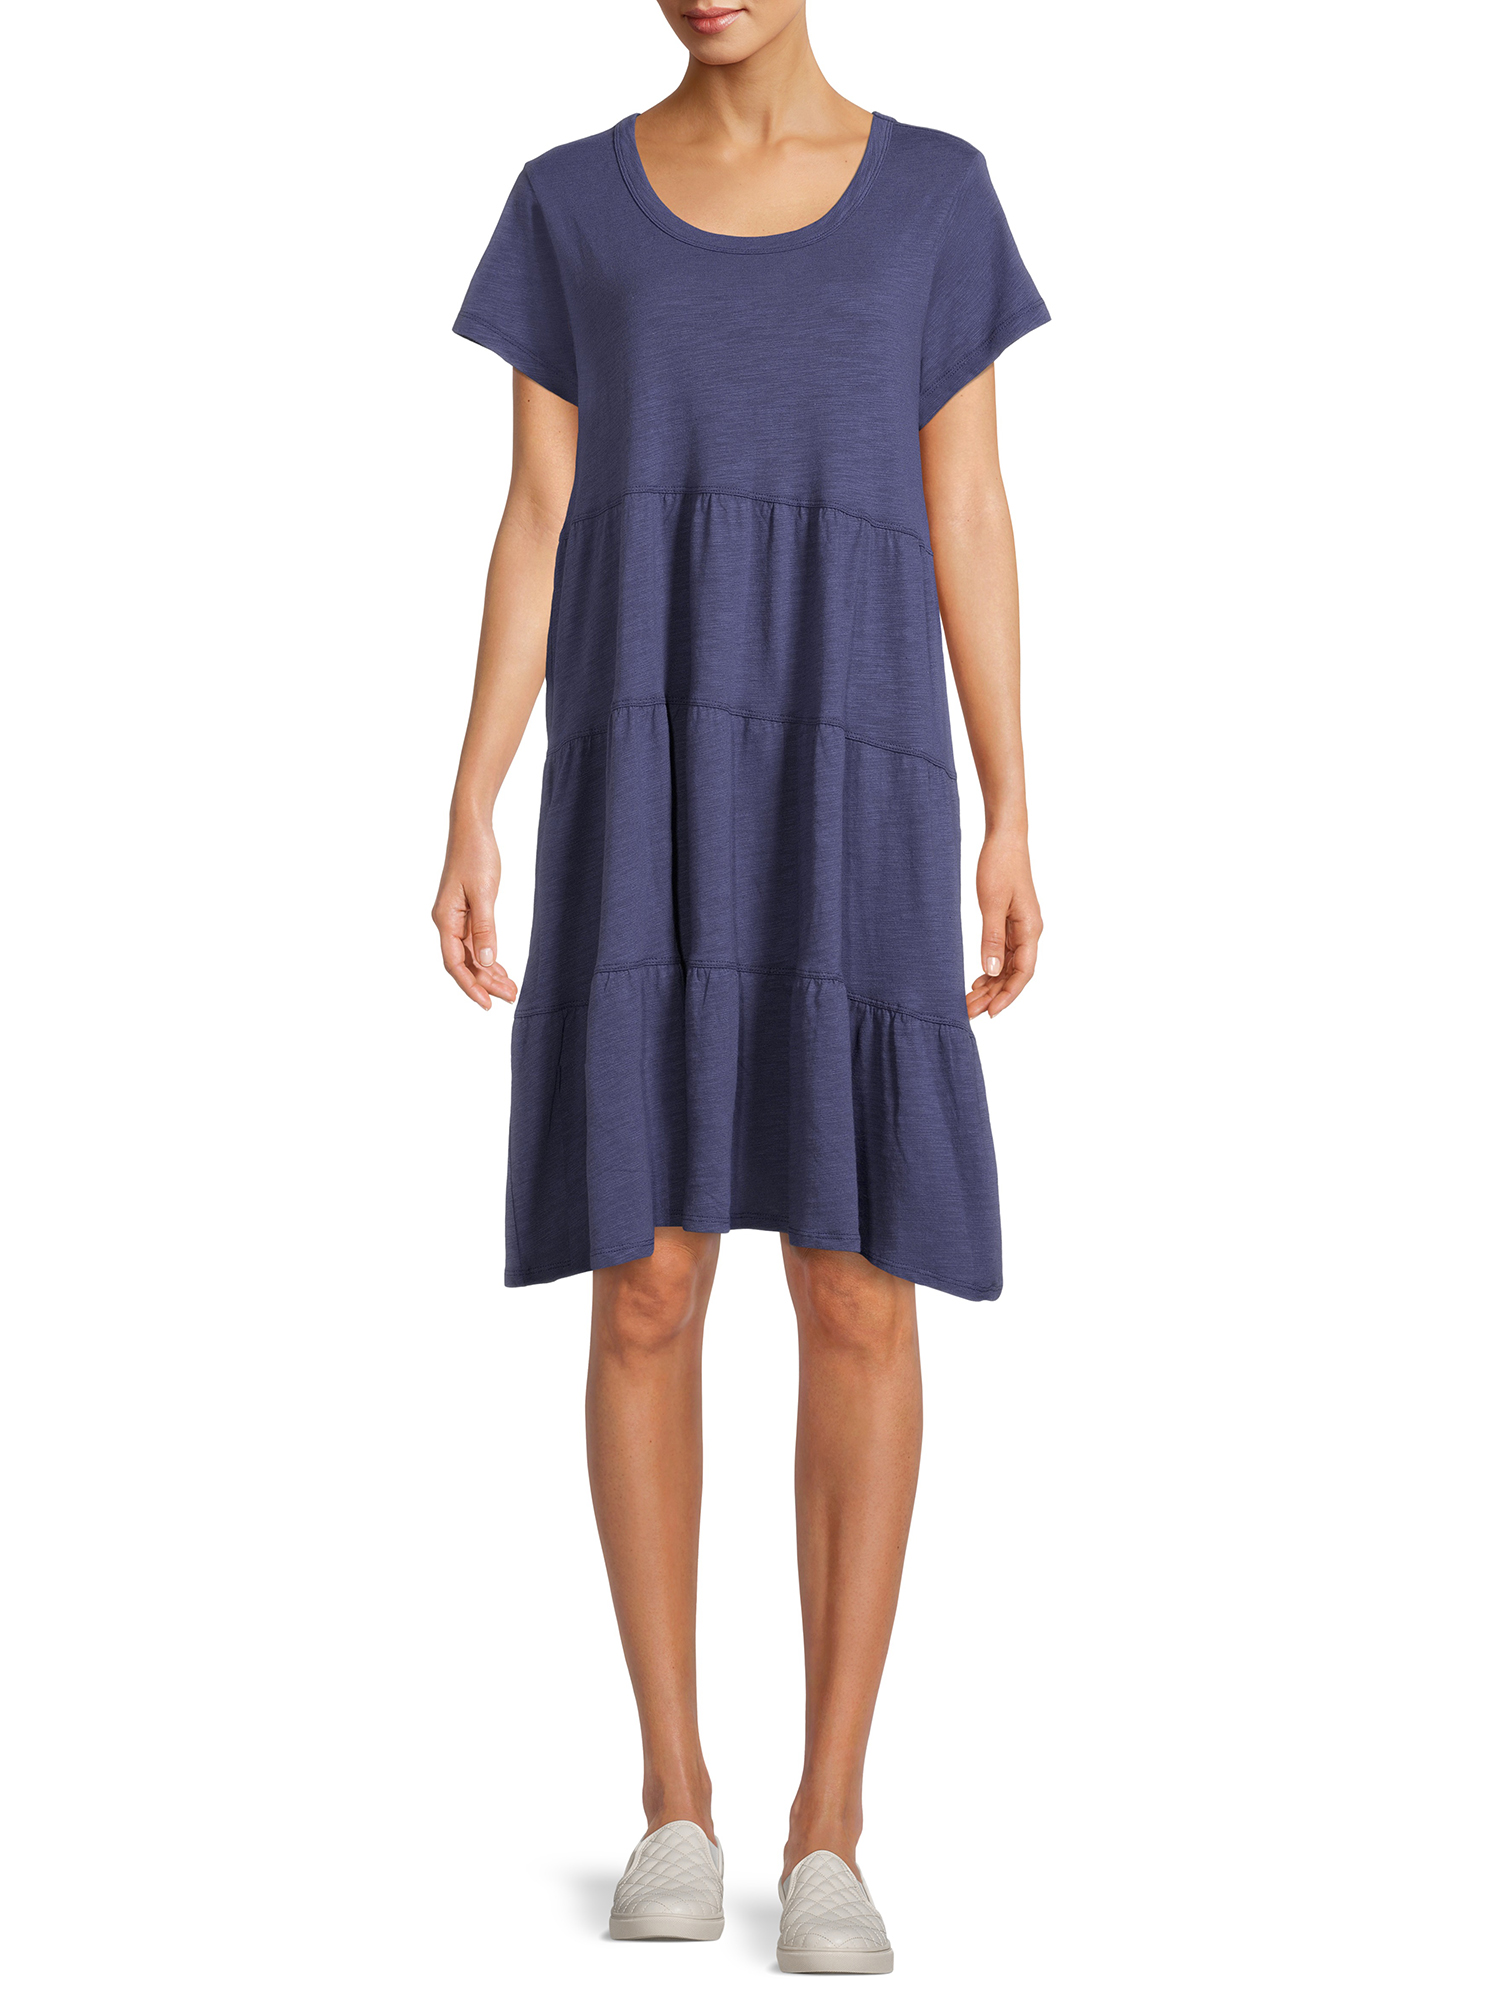 Time and Tru Women's Tiered Knit Dress - image 2 of 7